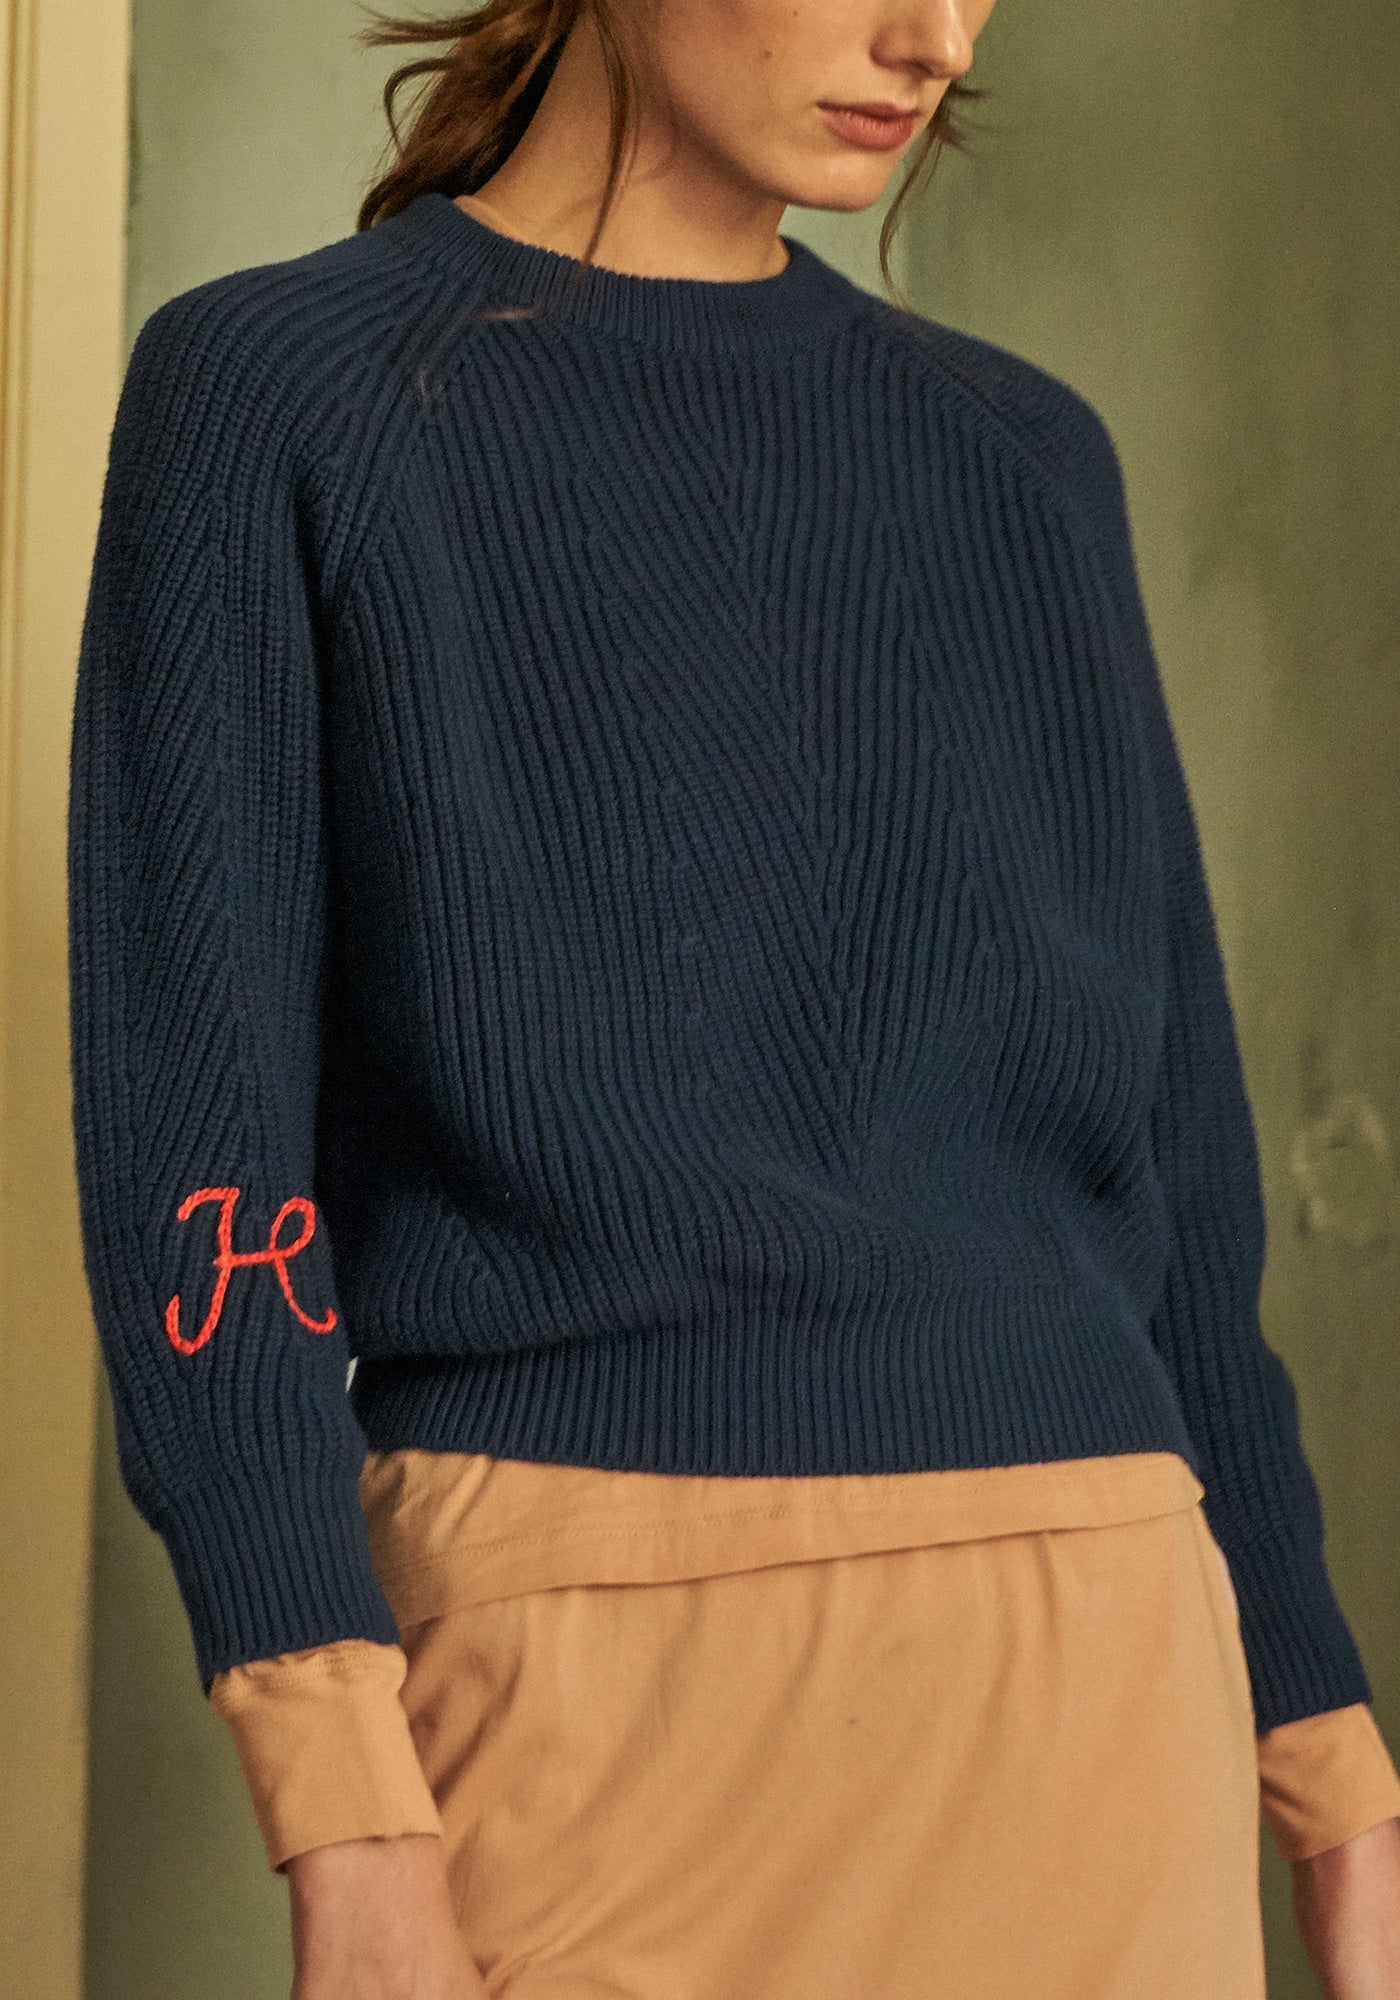 Embroidered Monogram Navy Chelsea Sweater - 1 Initial